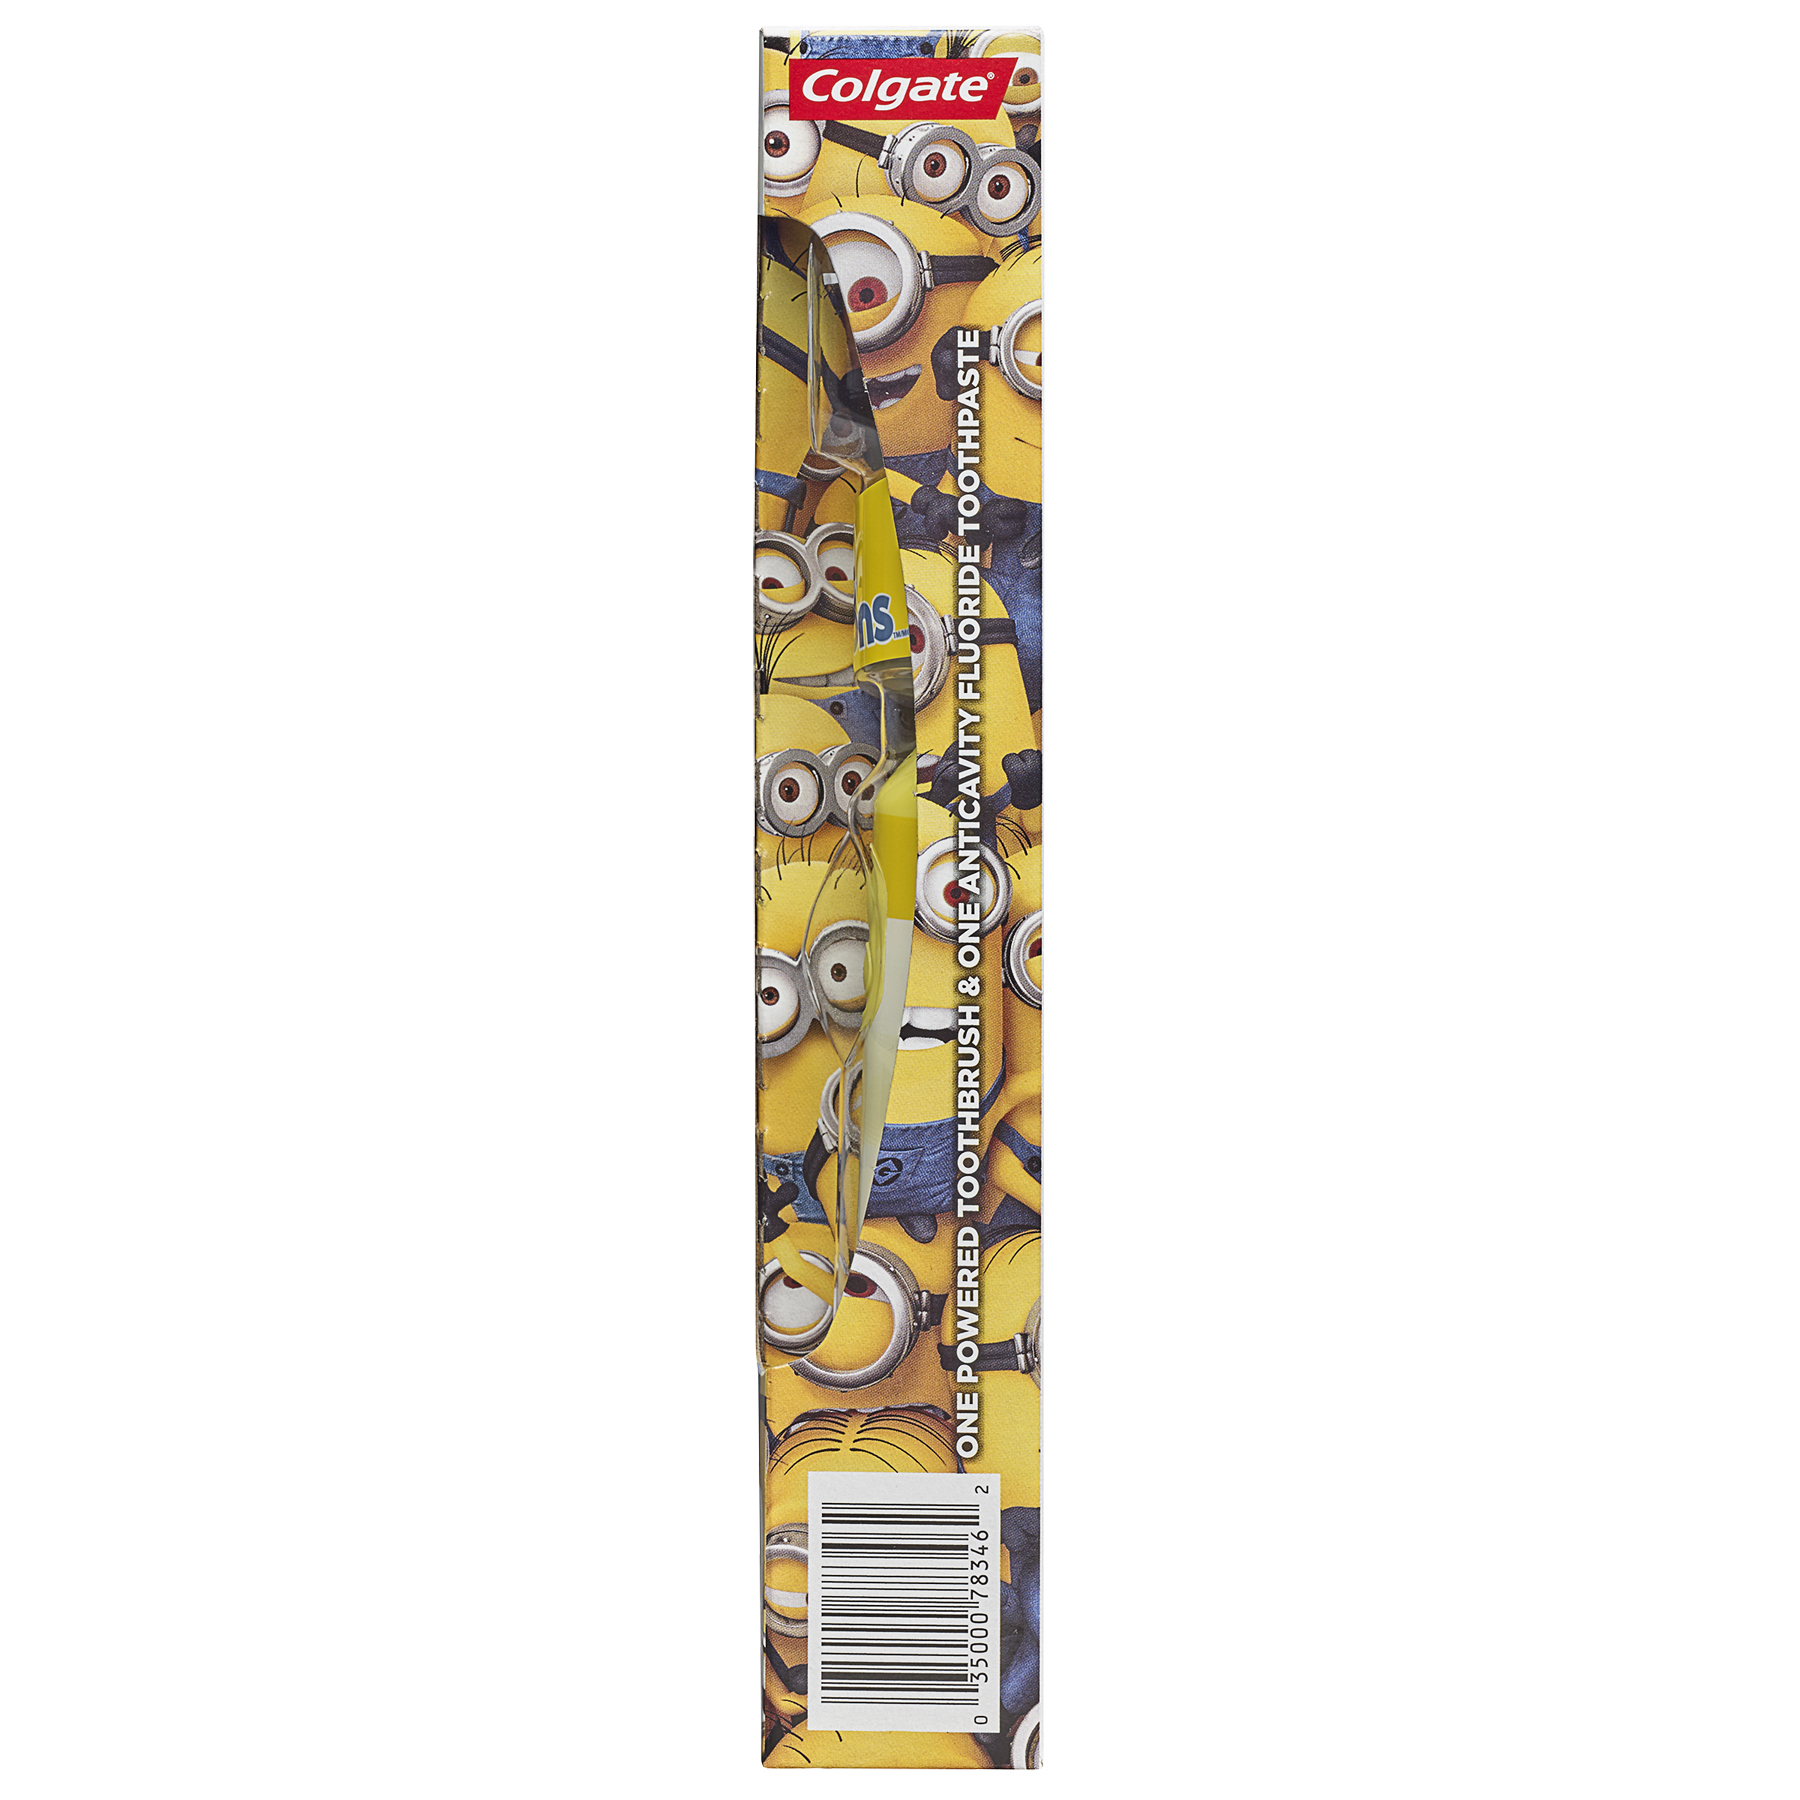 Colgate Kids Powered Toothbrush, Toothpaste Pack - Minions - image 4 of 10